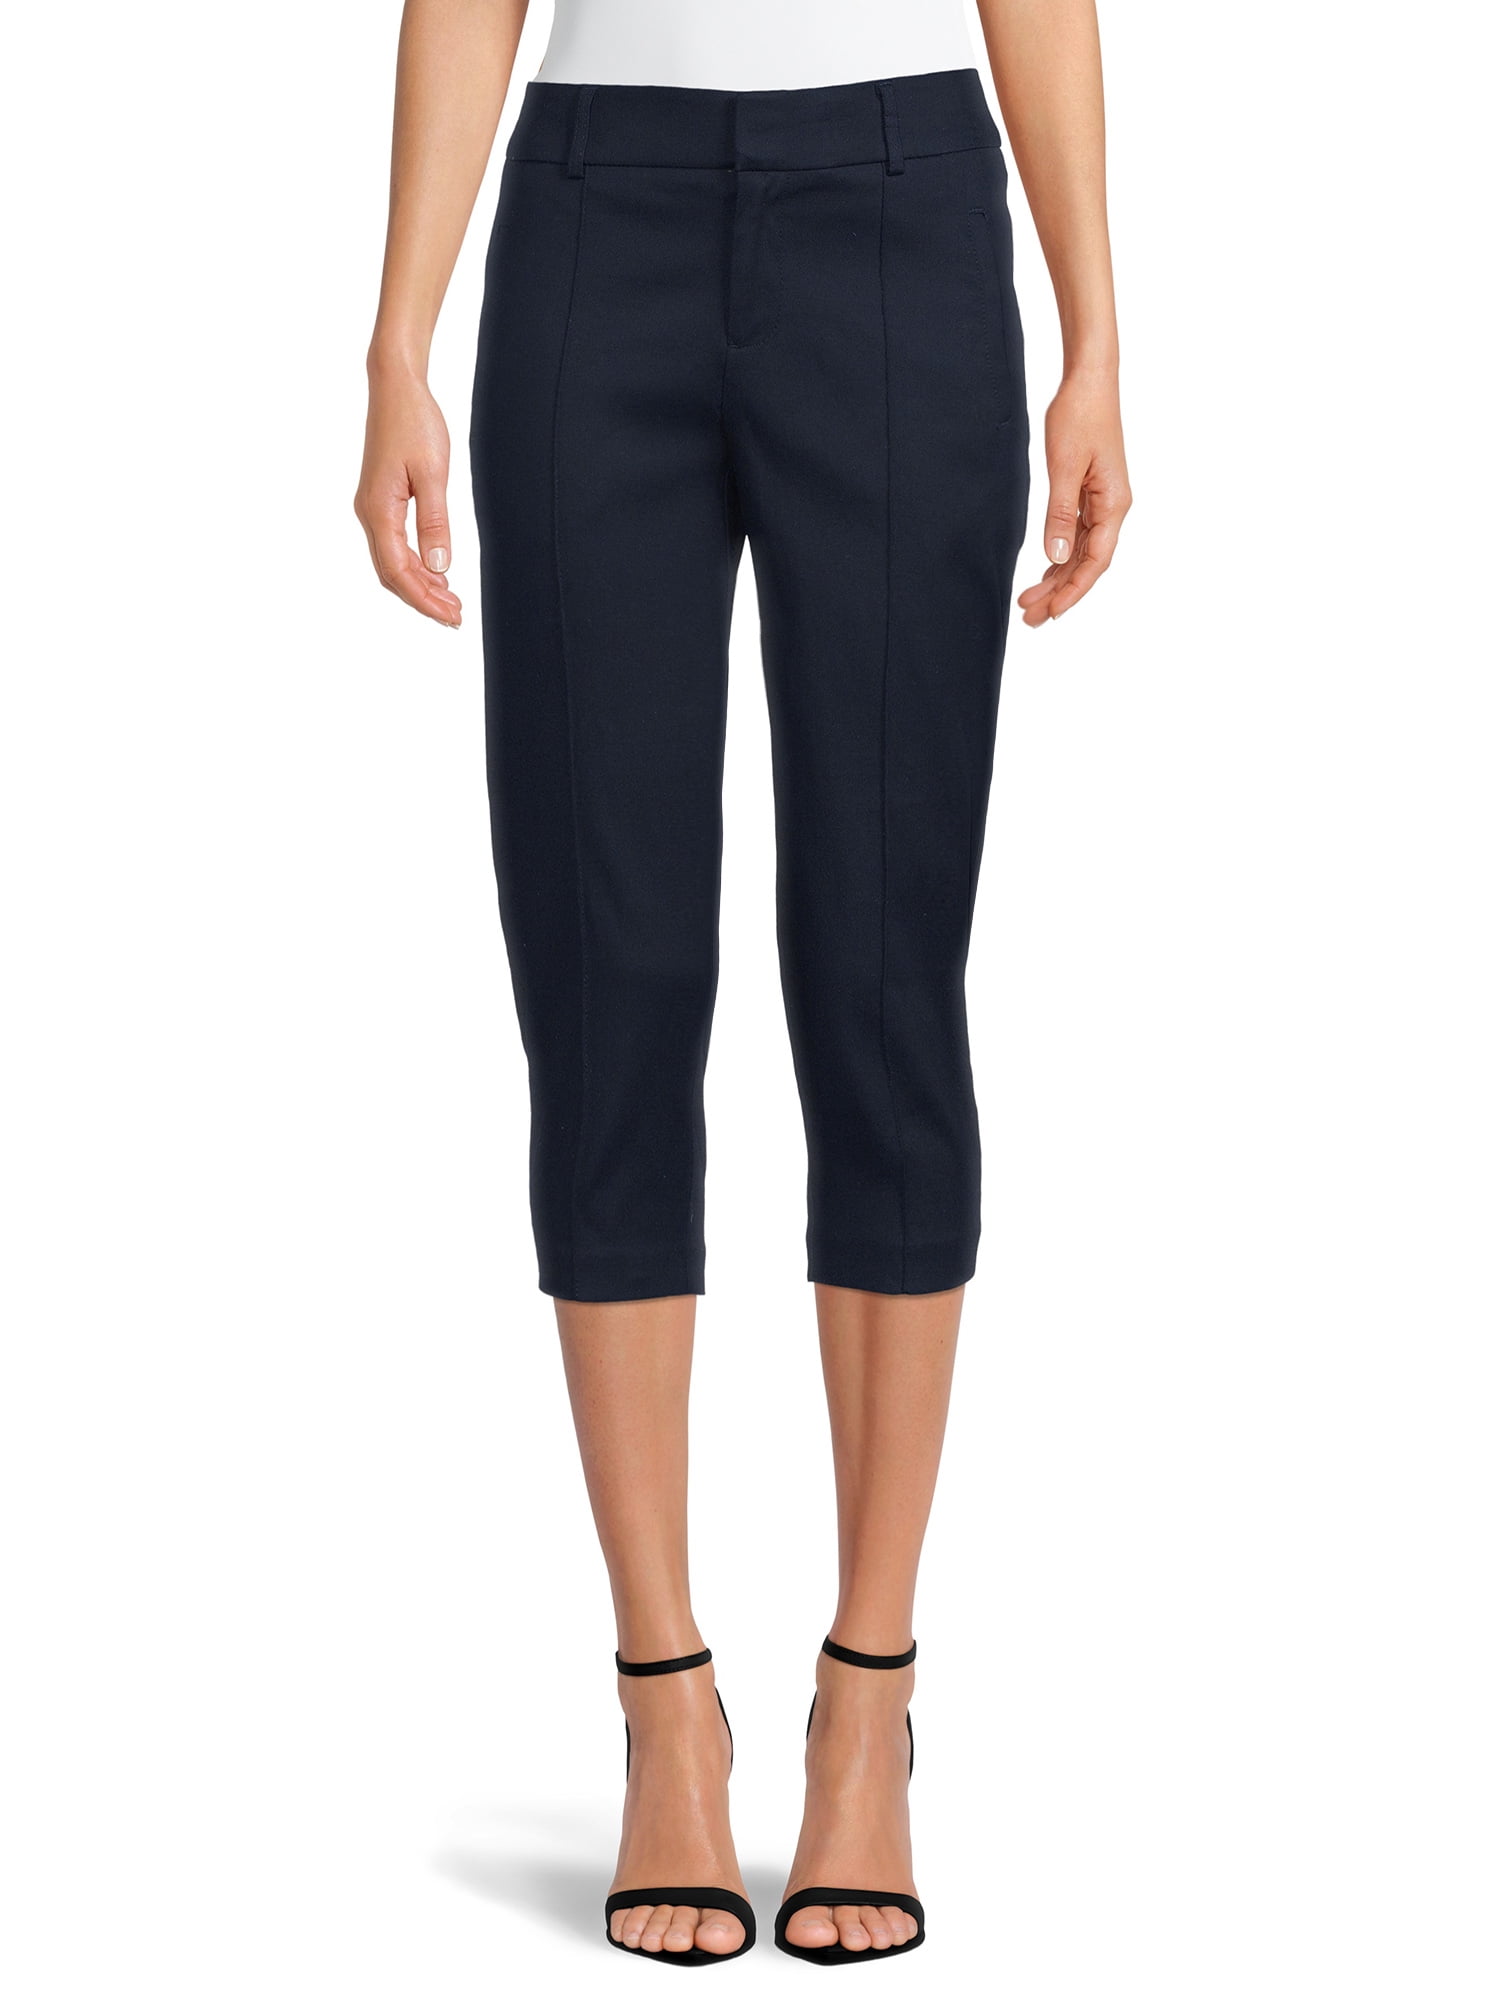 Shop Time and Tru Women's Pull On Capri Pants - Great Prices Await ...